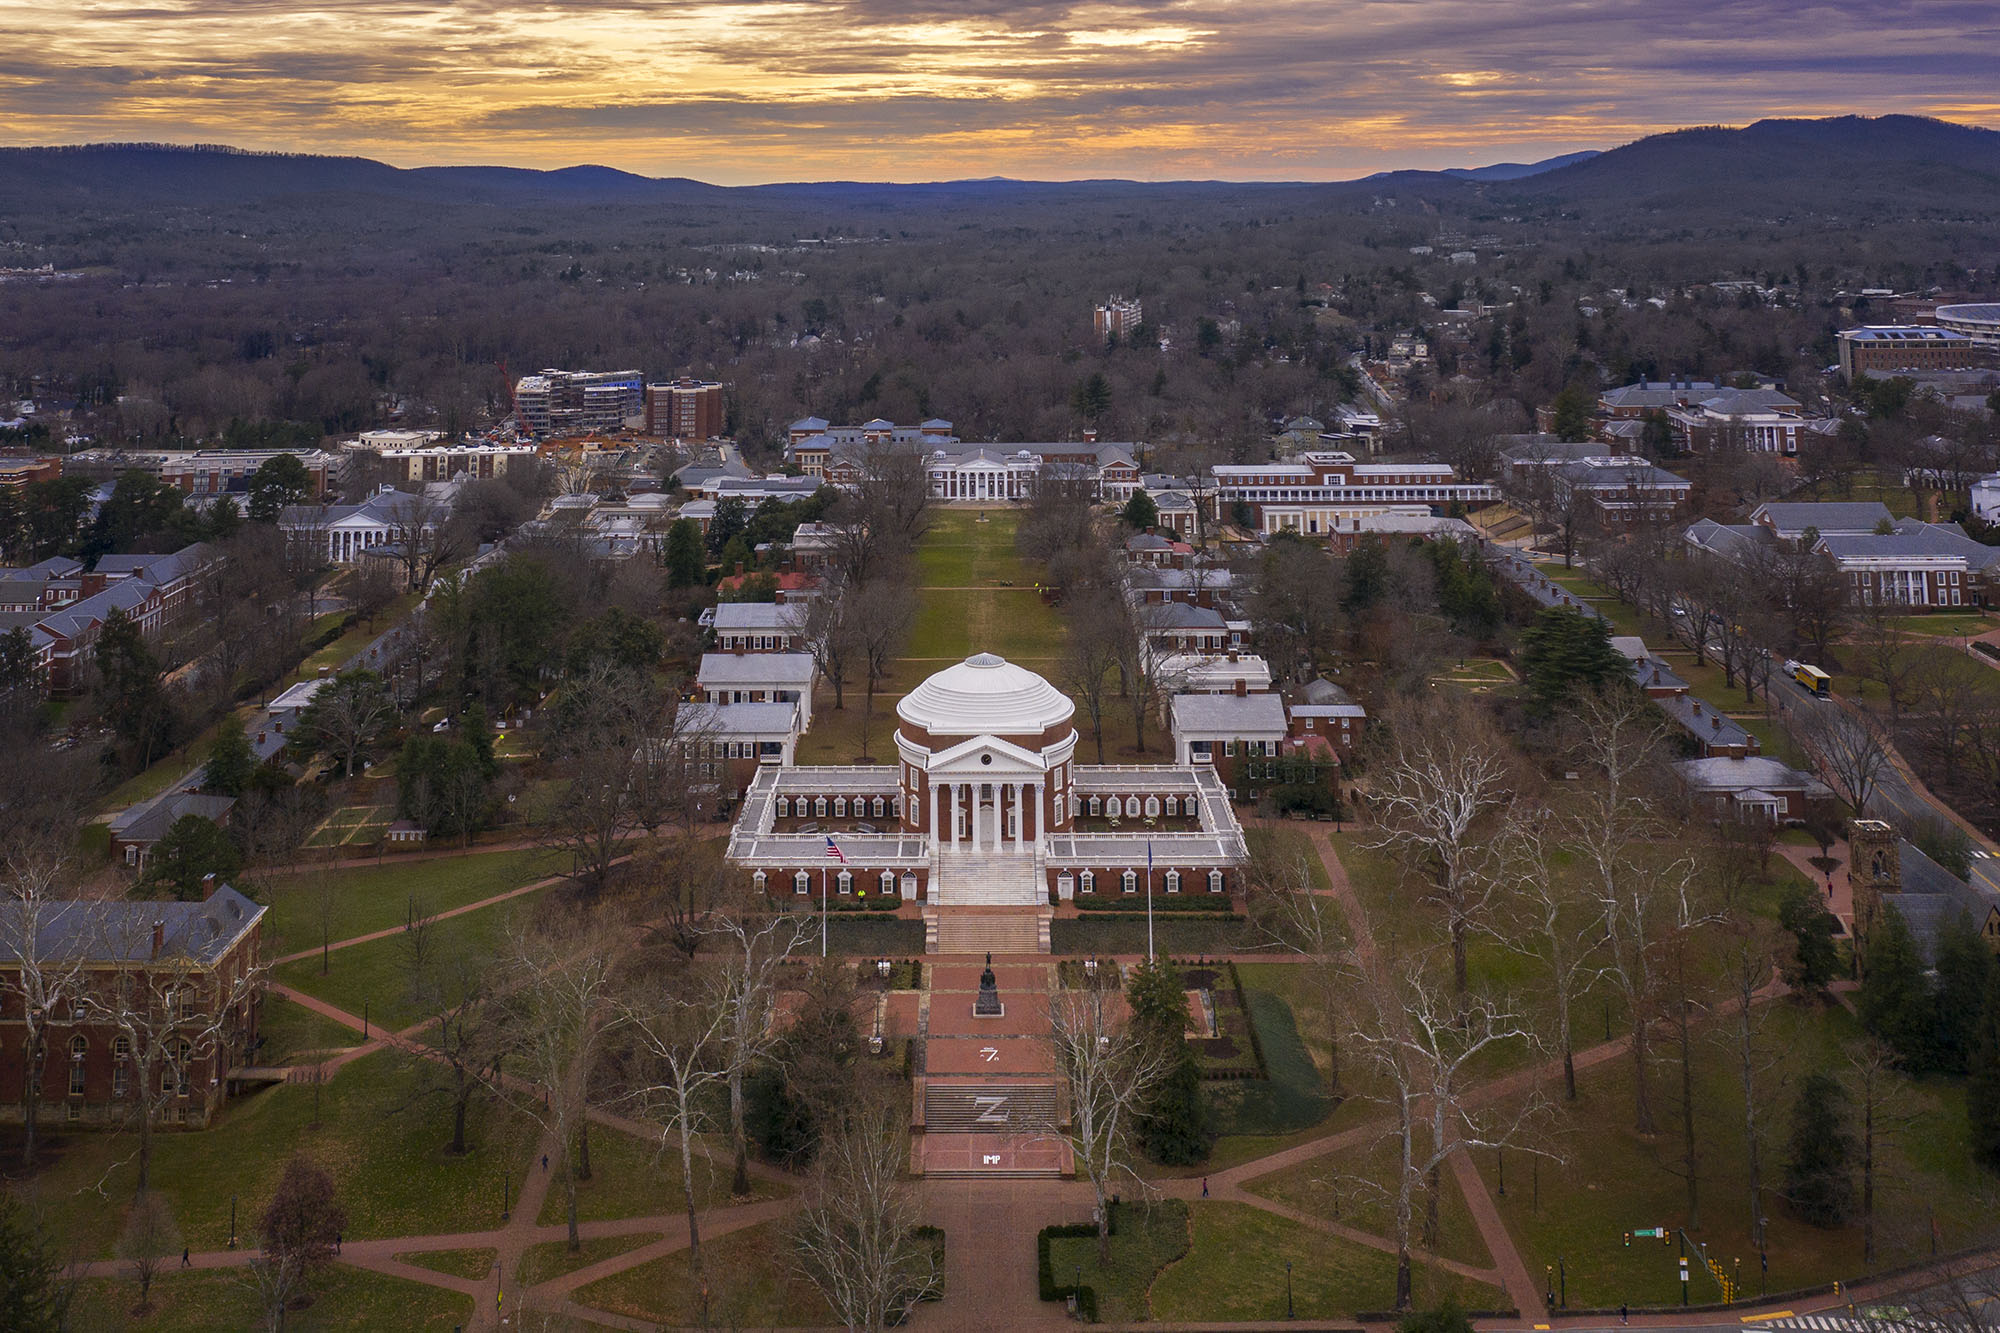 Arial view of the Rotunda at sunset on a cloudy day